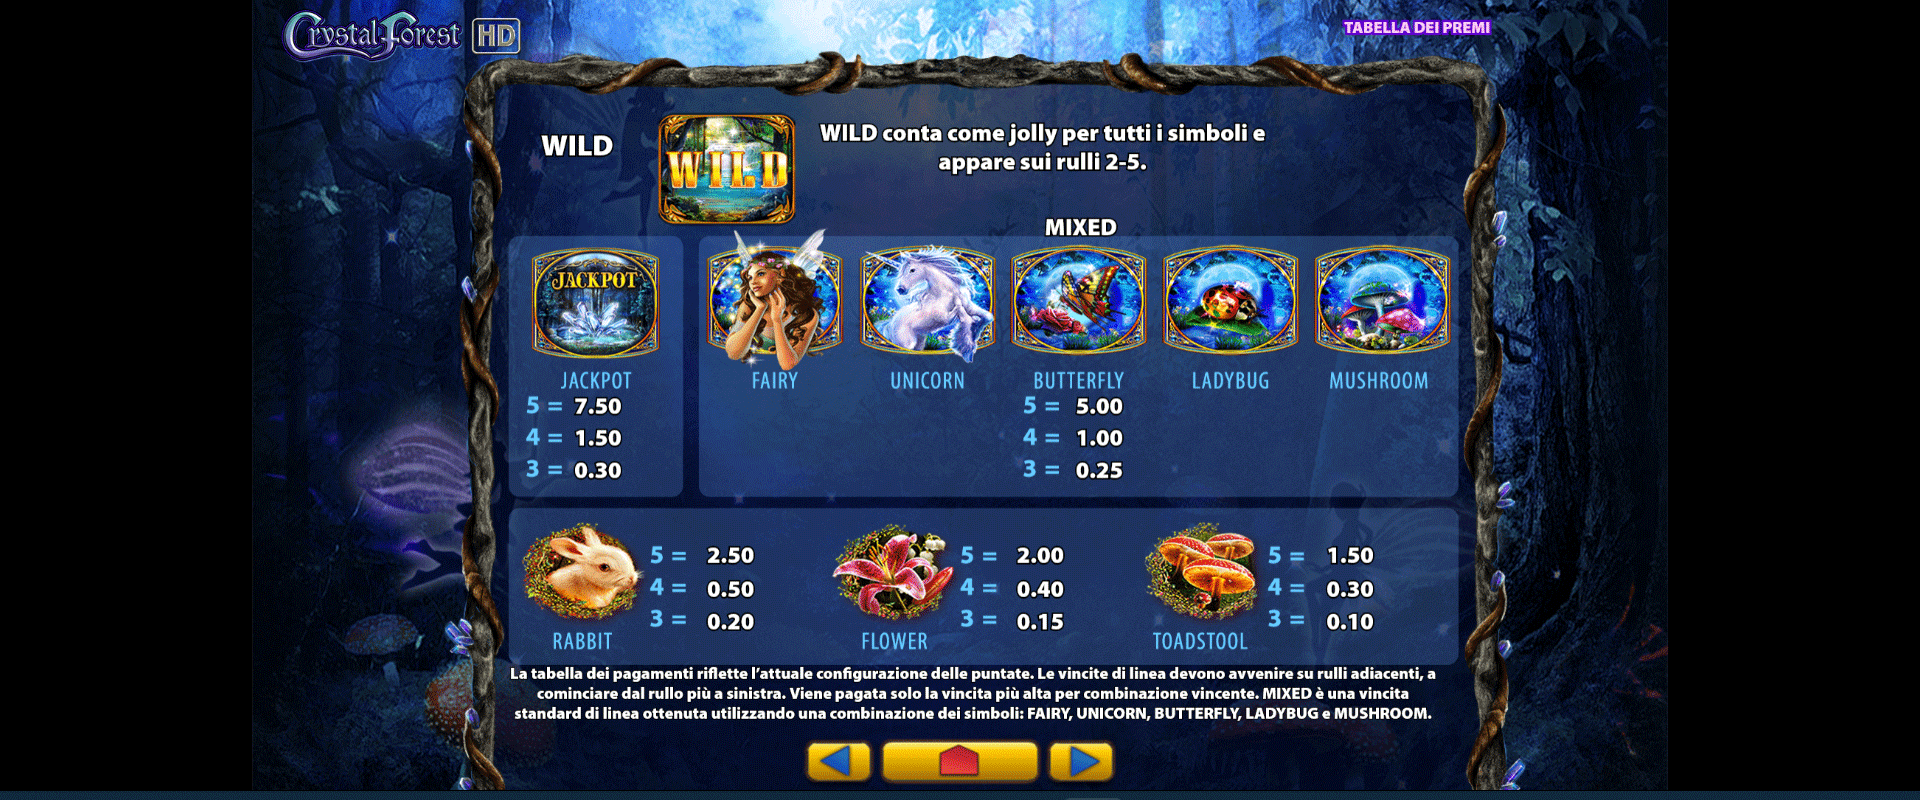 paytable slot online crystal forest hd